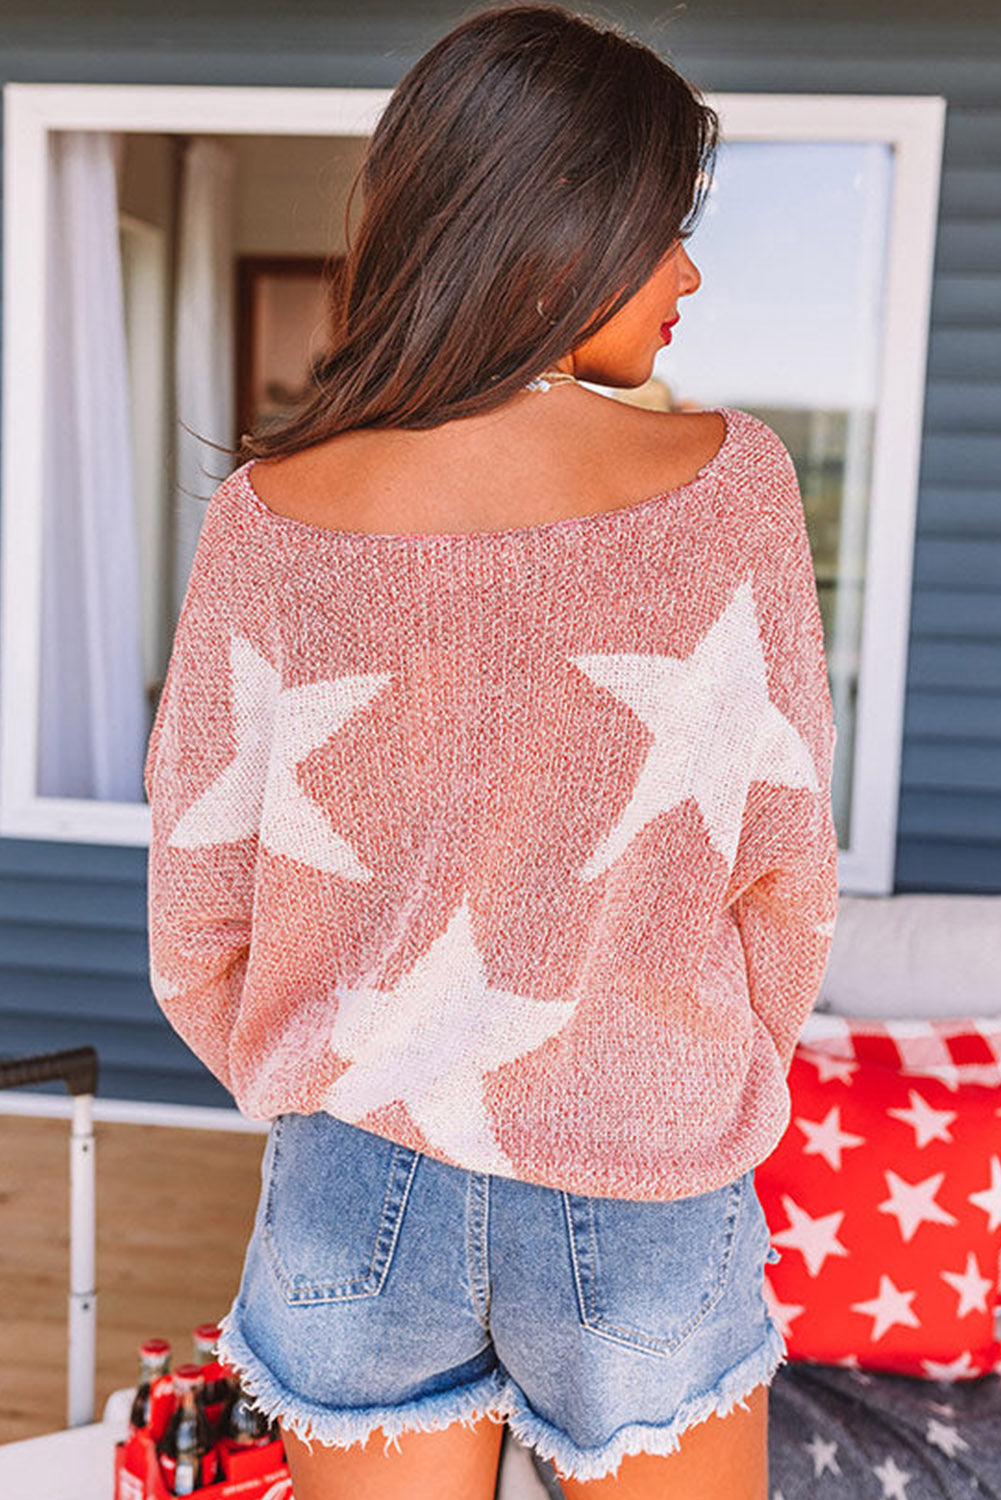 LC2723061-3-S, LC2723061-3-M, LC2723061-3-L, LC2723061-3-XL, Red Big Star Spangled Casual Knit Sweater